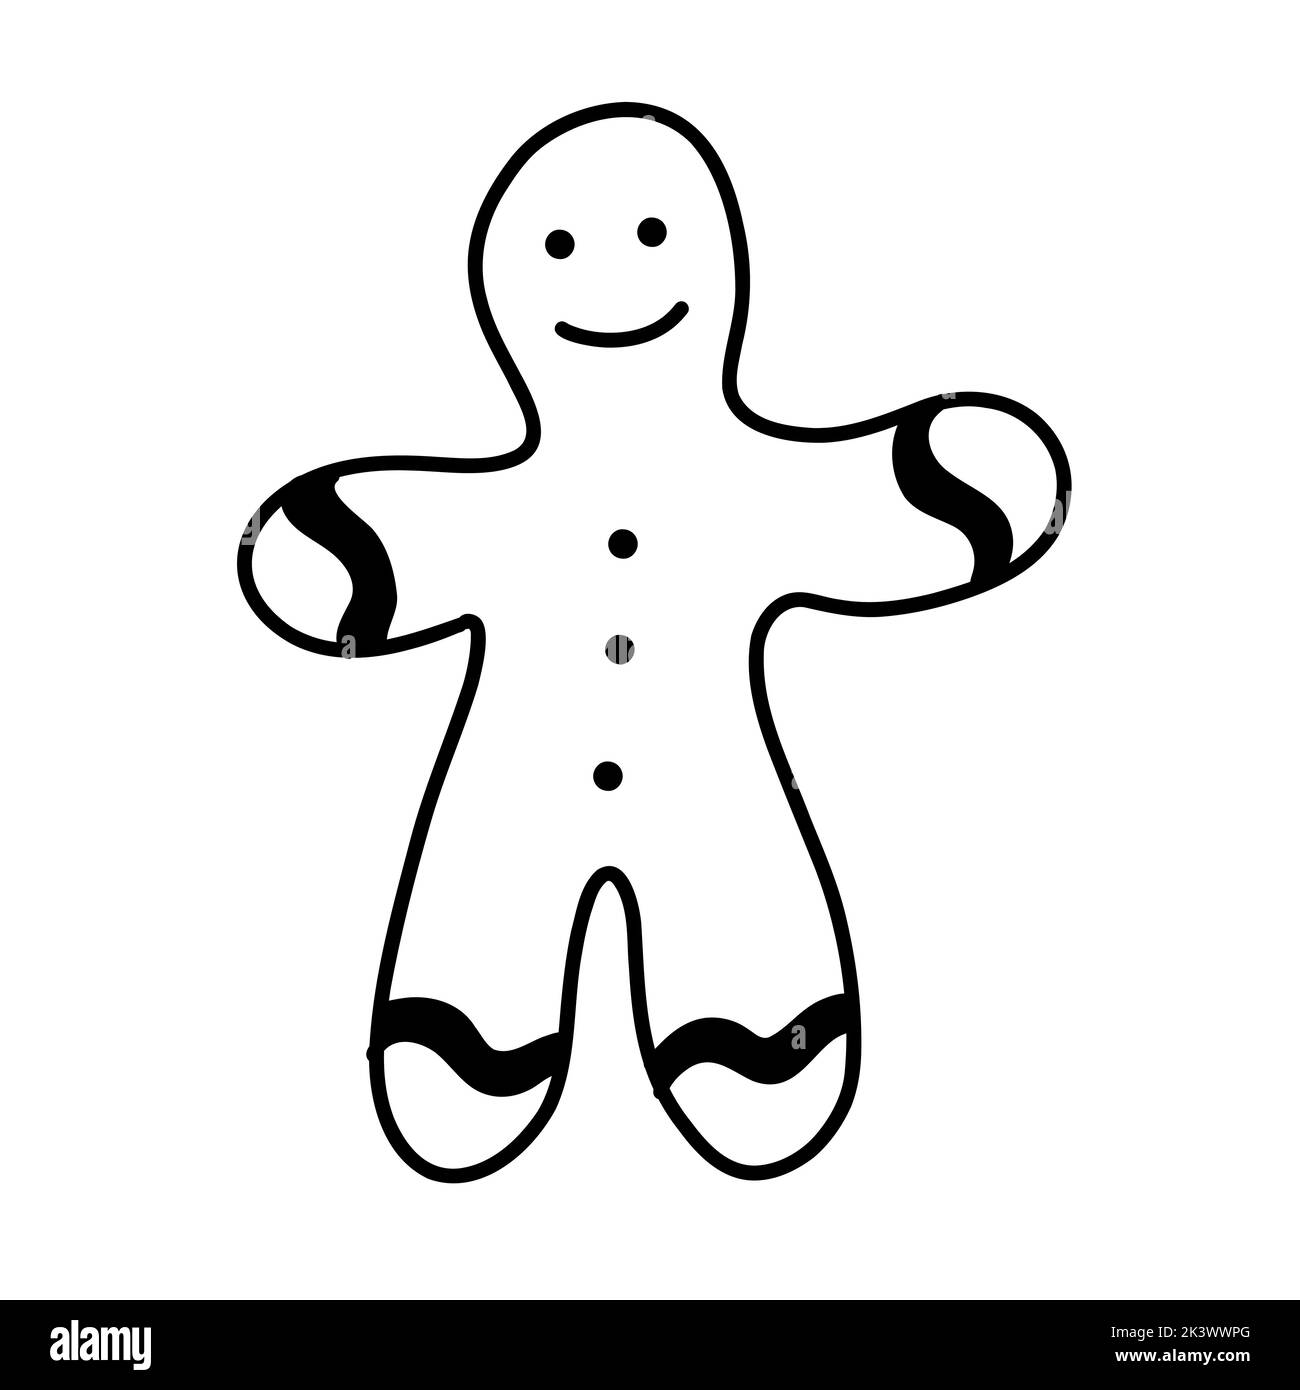 Hand drawn doodle of Christmas gingerbread man in vector format for web, print, or advertising use. Stock Vector